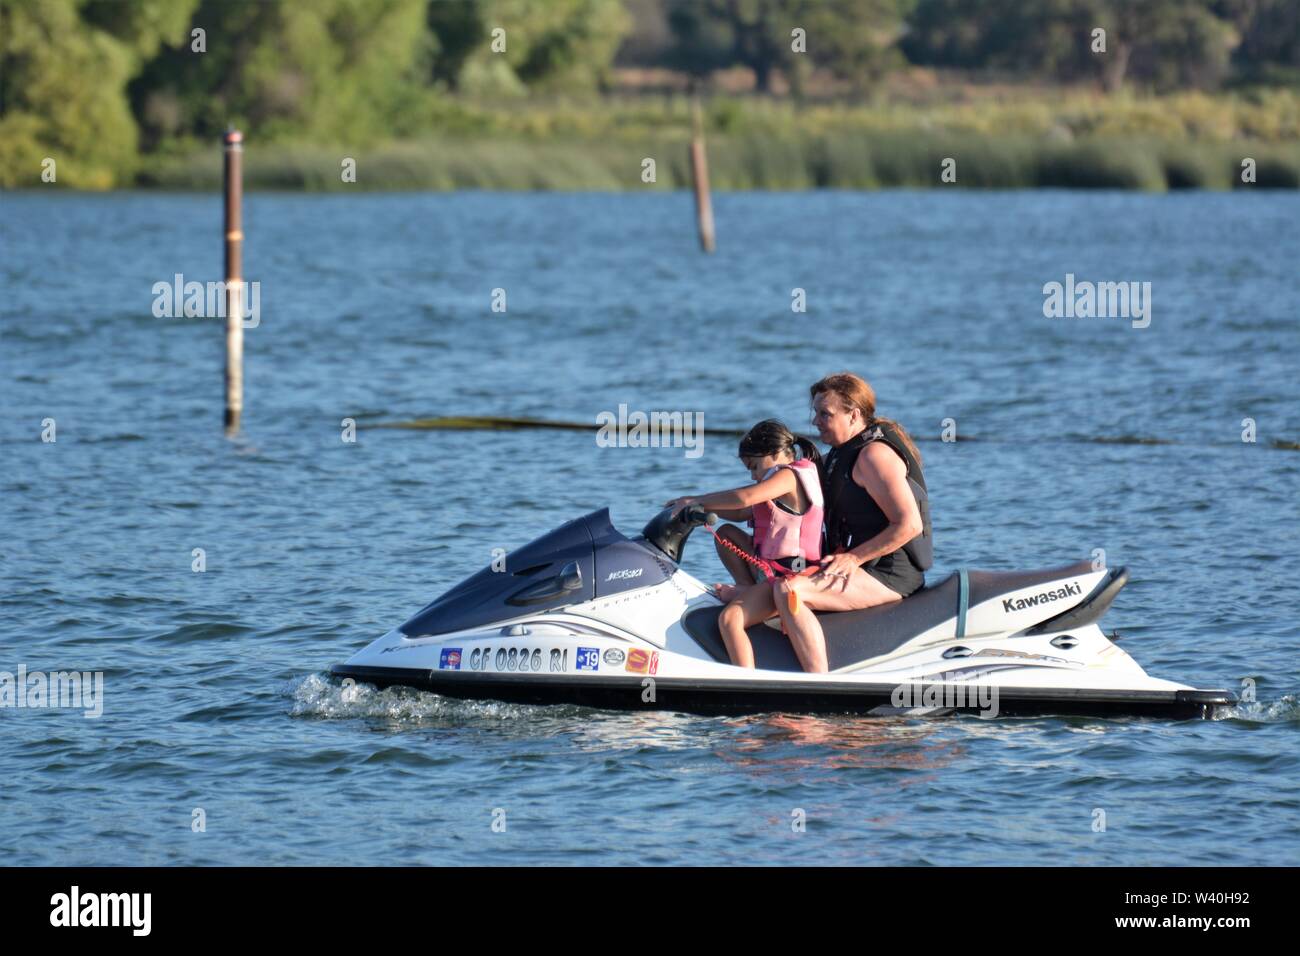 People On Jet Skis In Clear Lake Clearlake California Learning And